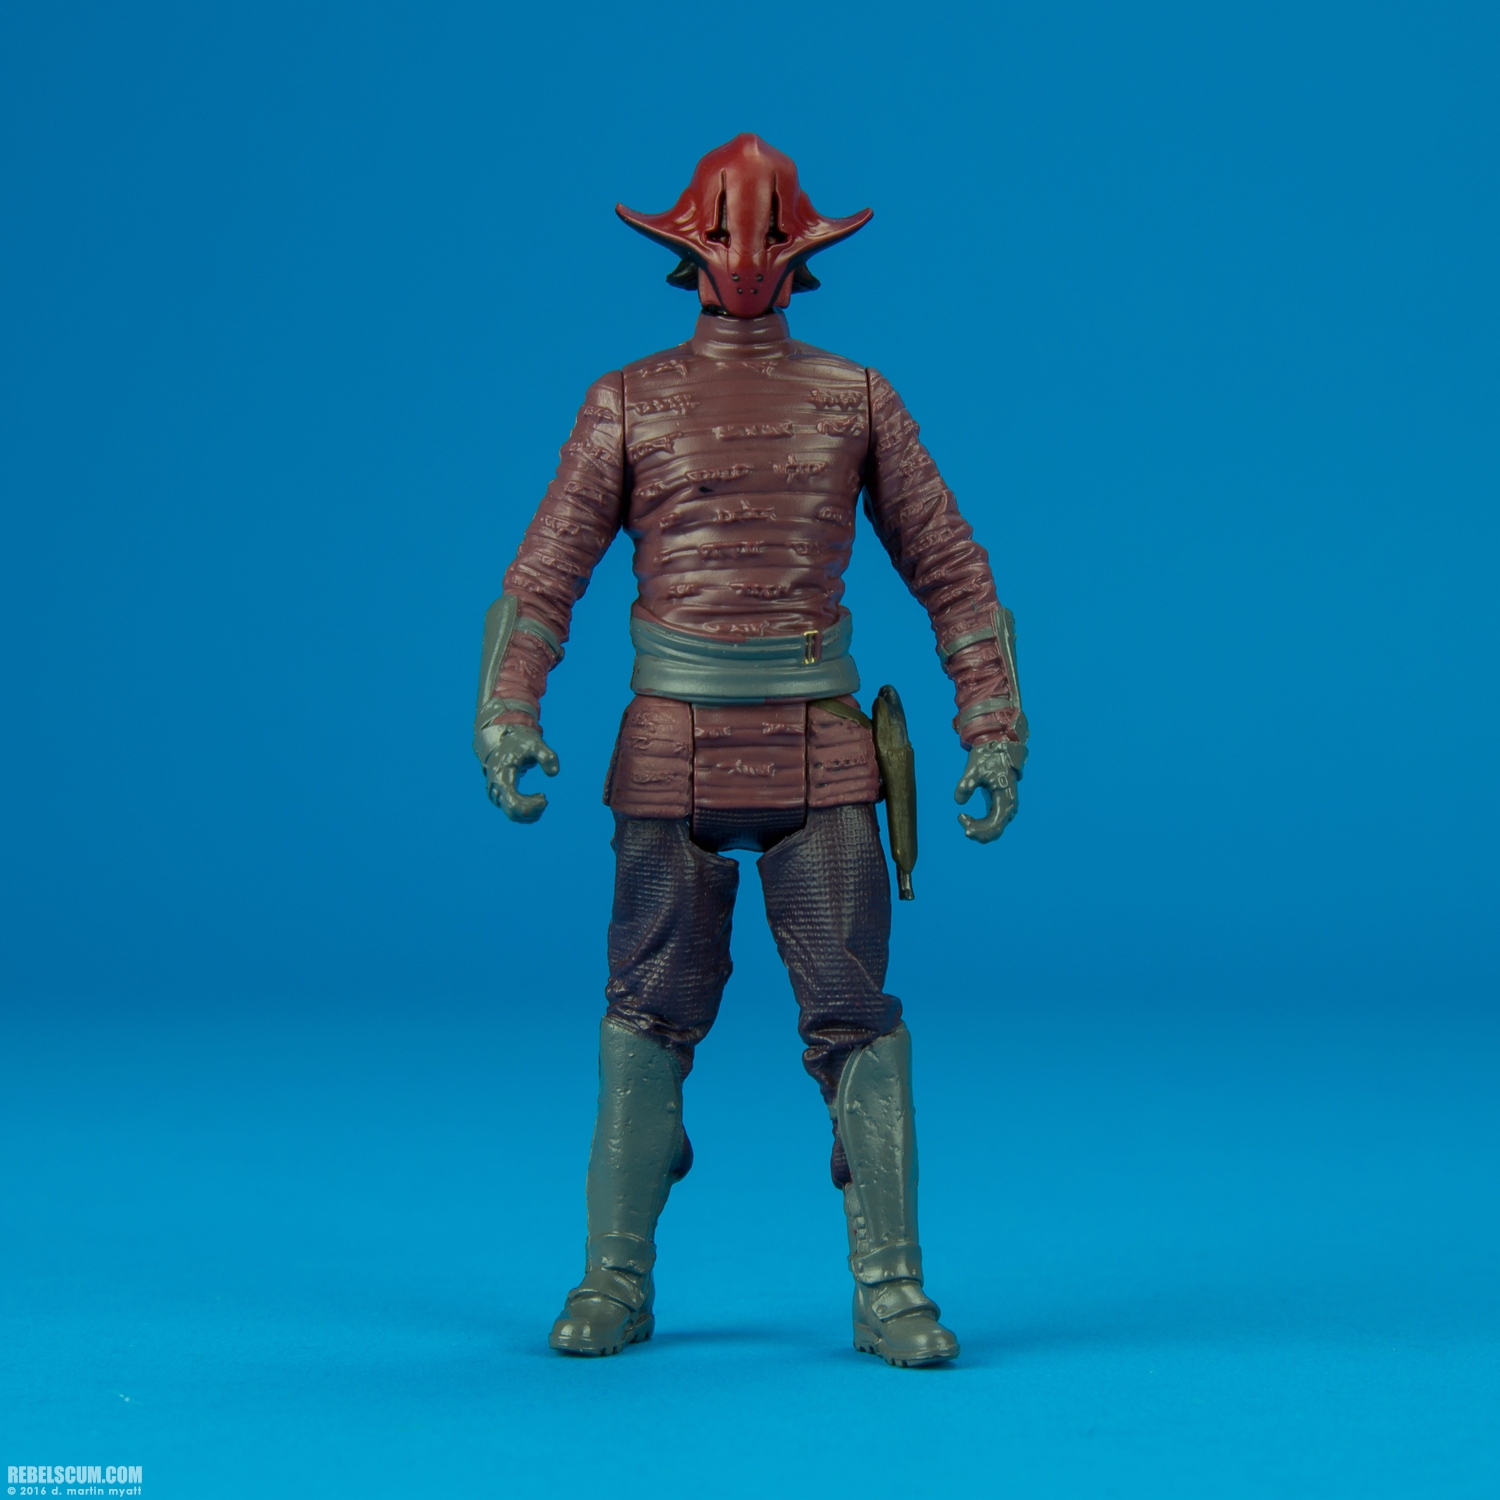 Sidon-Ithano-first-Mate-Quiggold-The-Force-Awakens-005.jpg